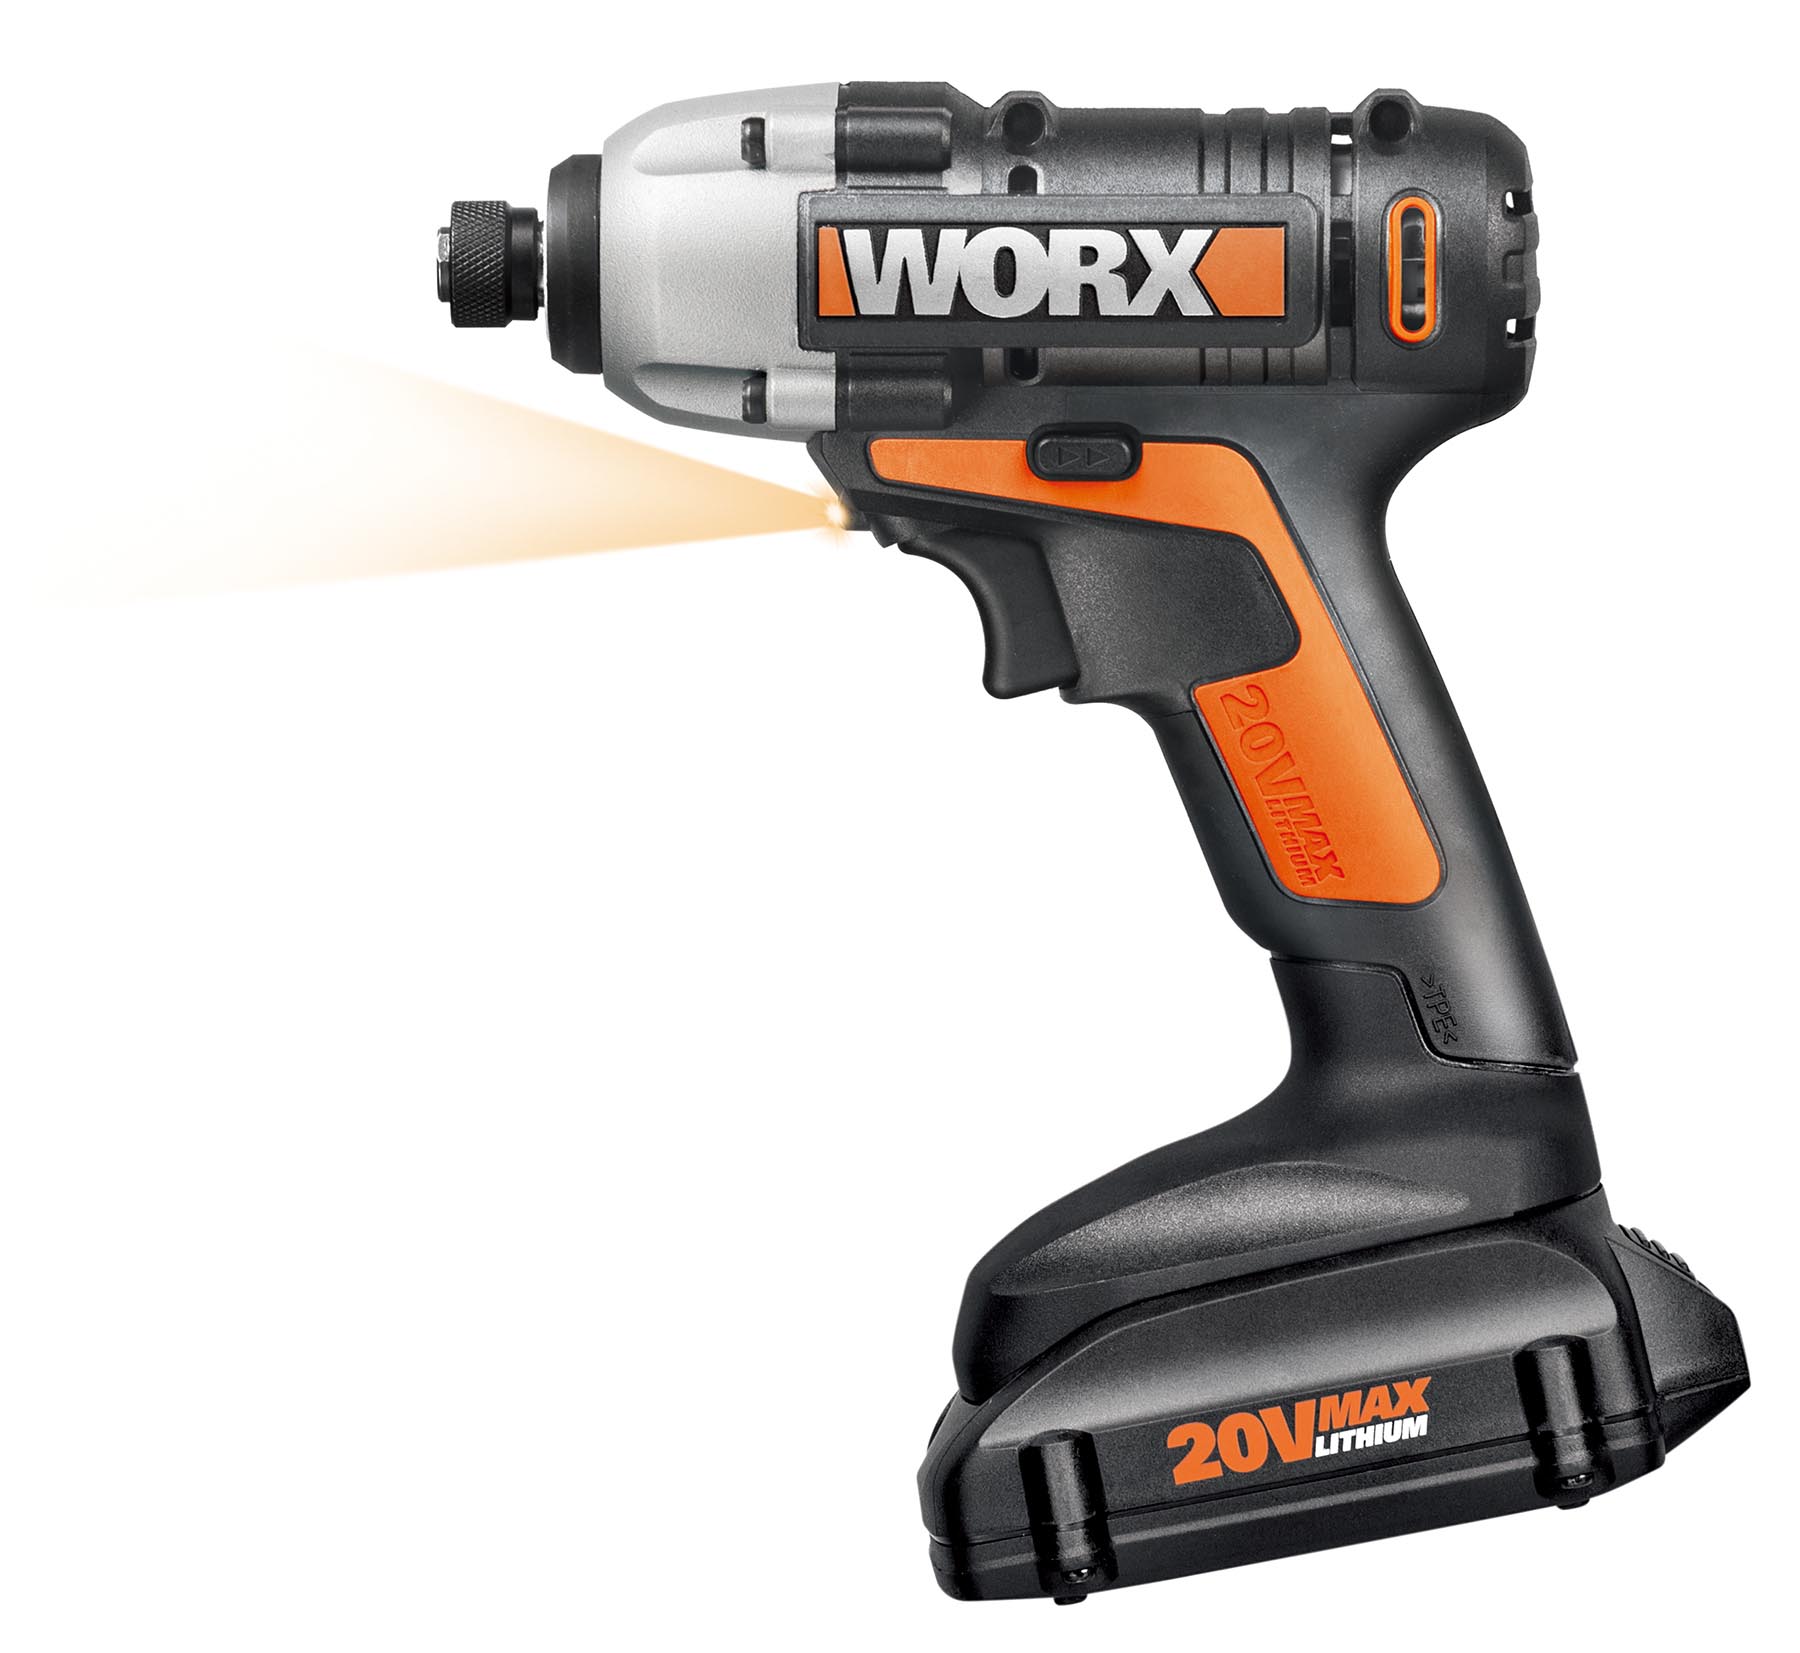 WORX 20V Impact Driver delivers 950 in.-lbs. of torque to drive or drill in tough materials.